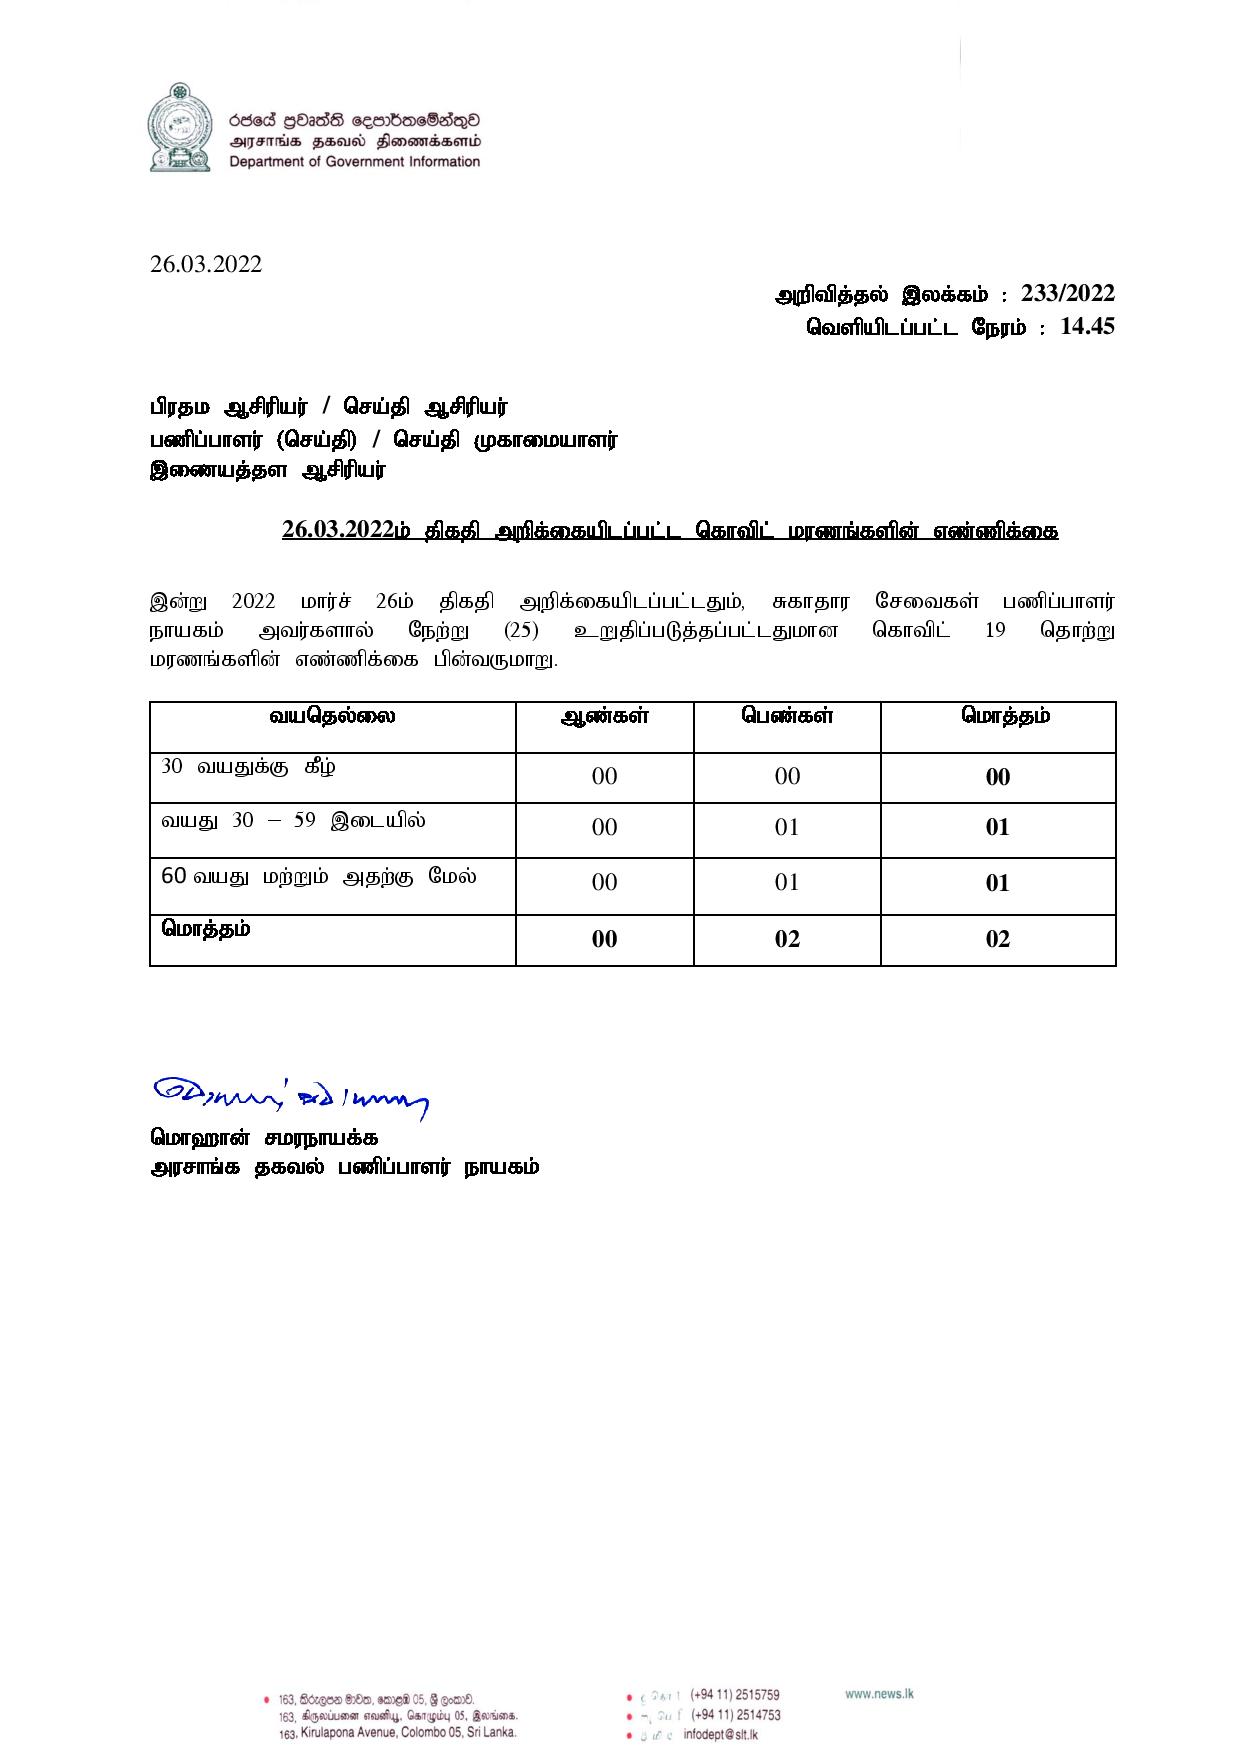 Release No 233 Tamil page 001